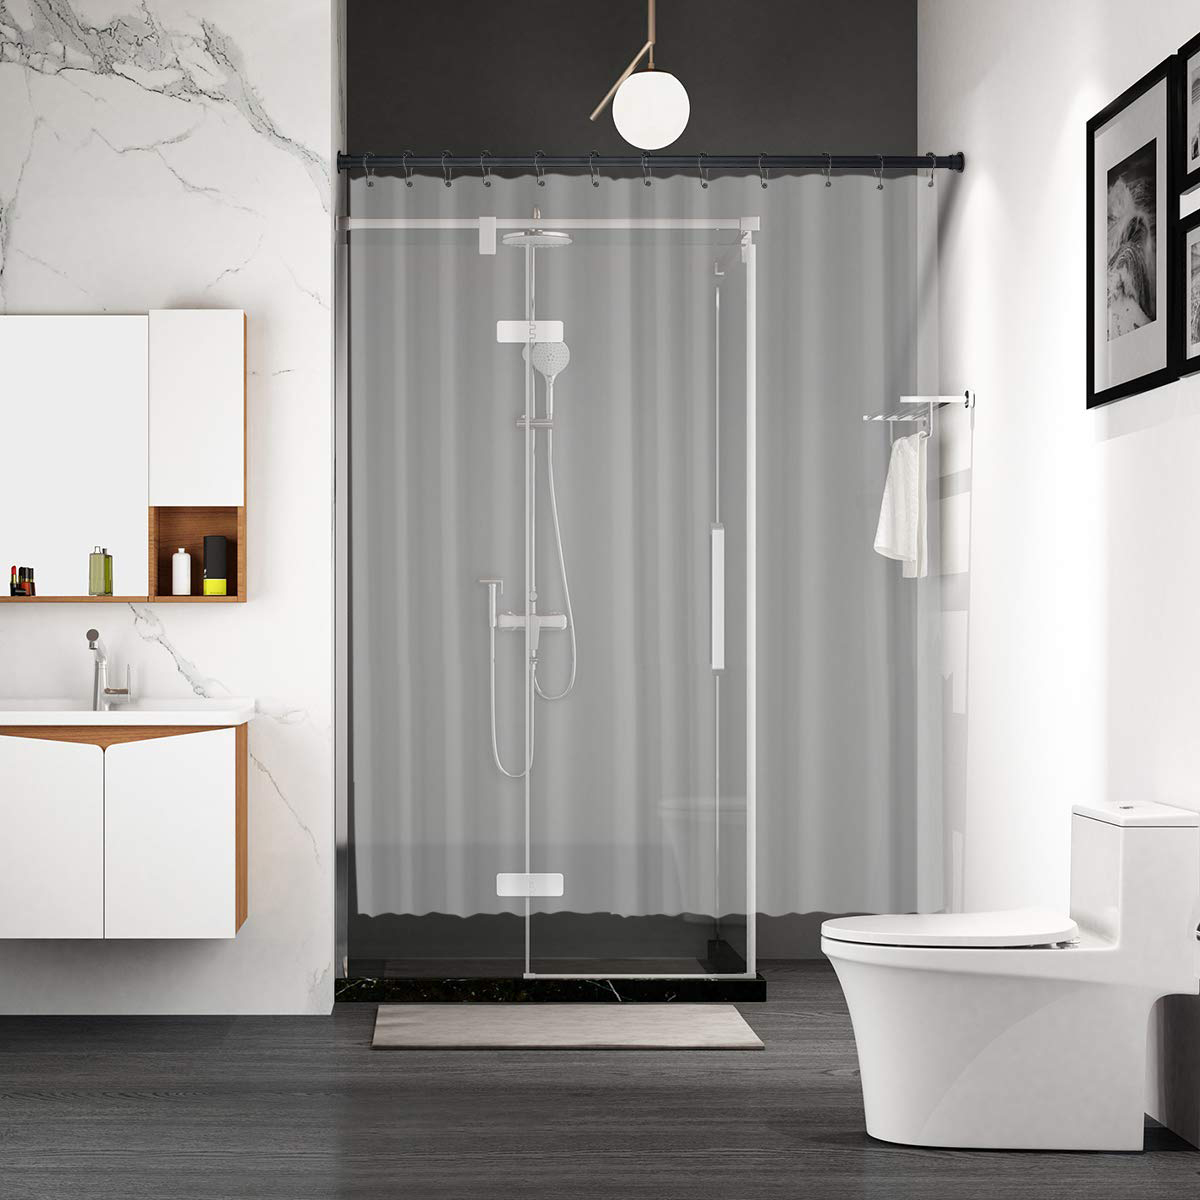 Stainless Steel Shower Curtain Rod 60 Inches for Windows or Doorway